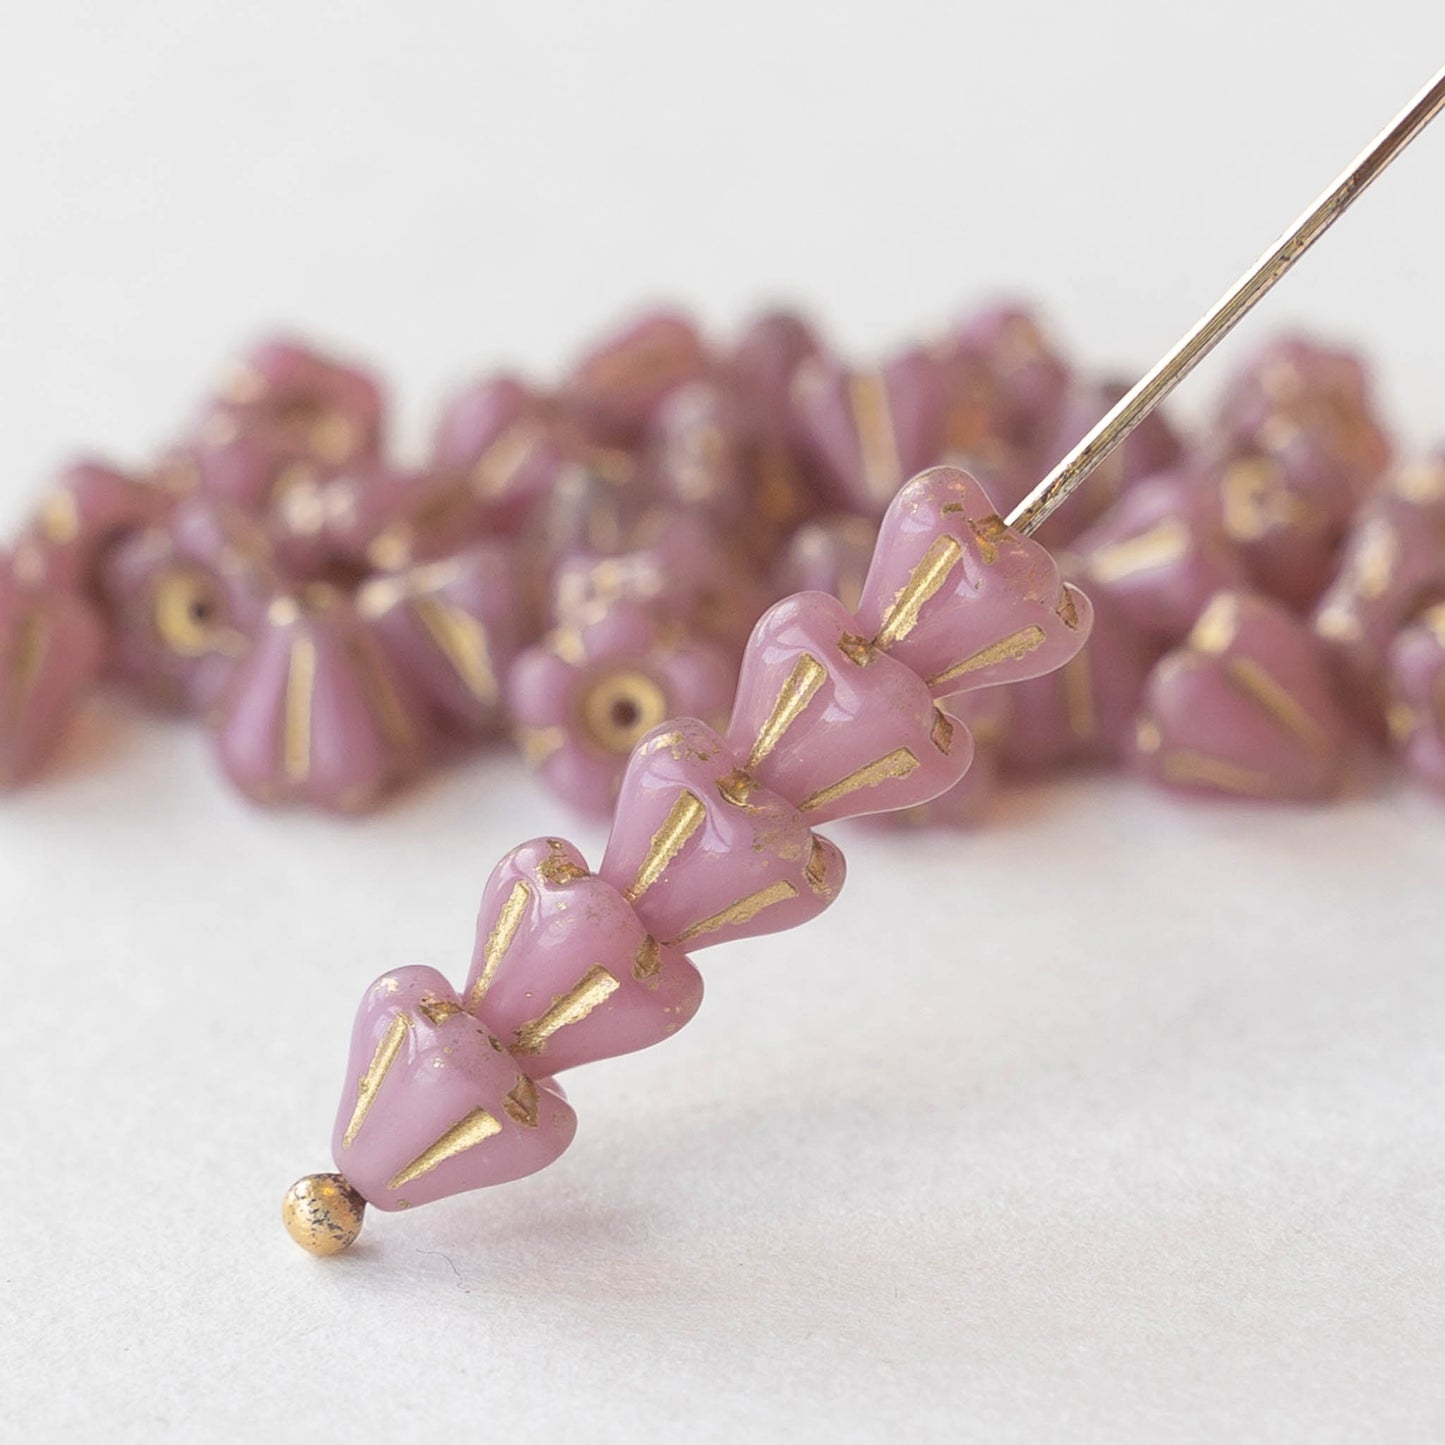 Load image into Gallery viewer, 4x6mm Bell Flower Beads -  Pink with Gold Wash- 30 Beads
